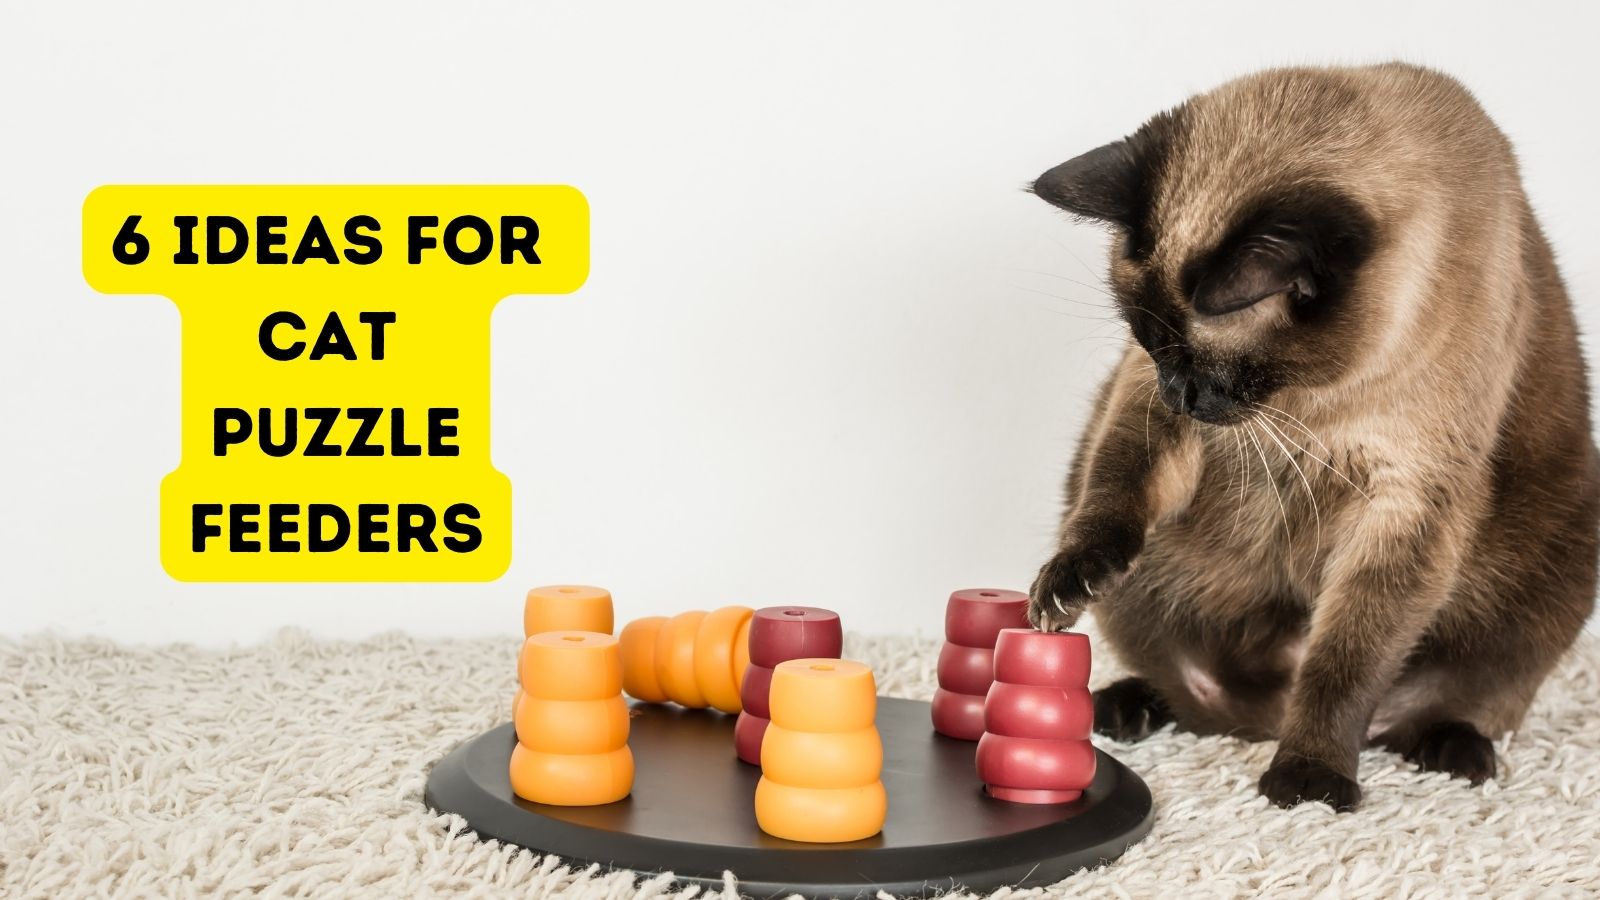 5 Awesome DIY Puzzle Games: Turn Your Cat's Food and Treats into Toys!